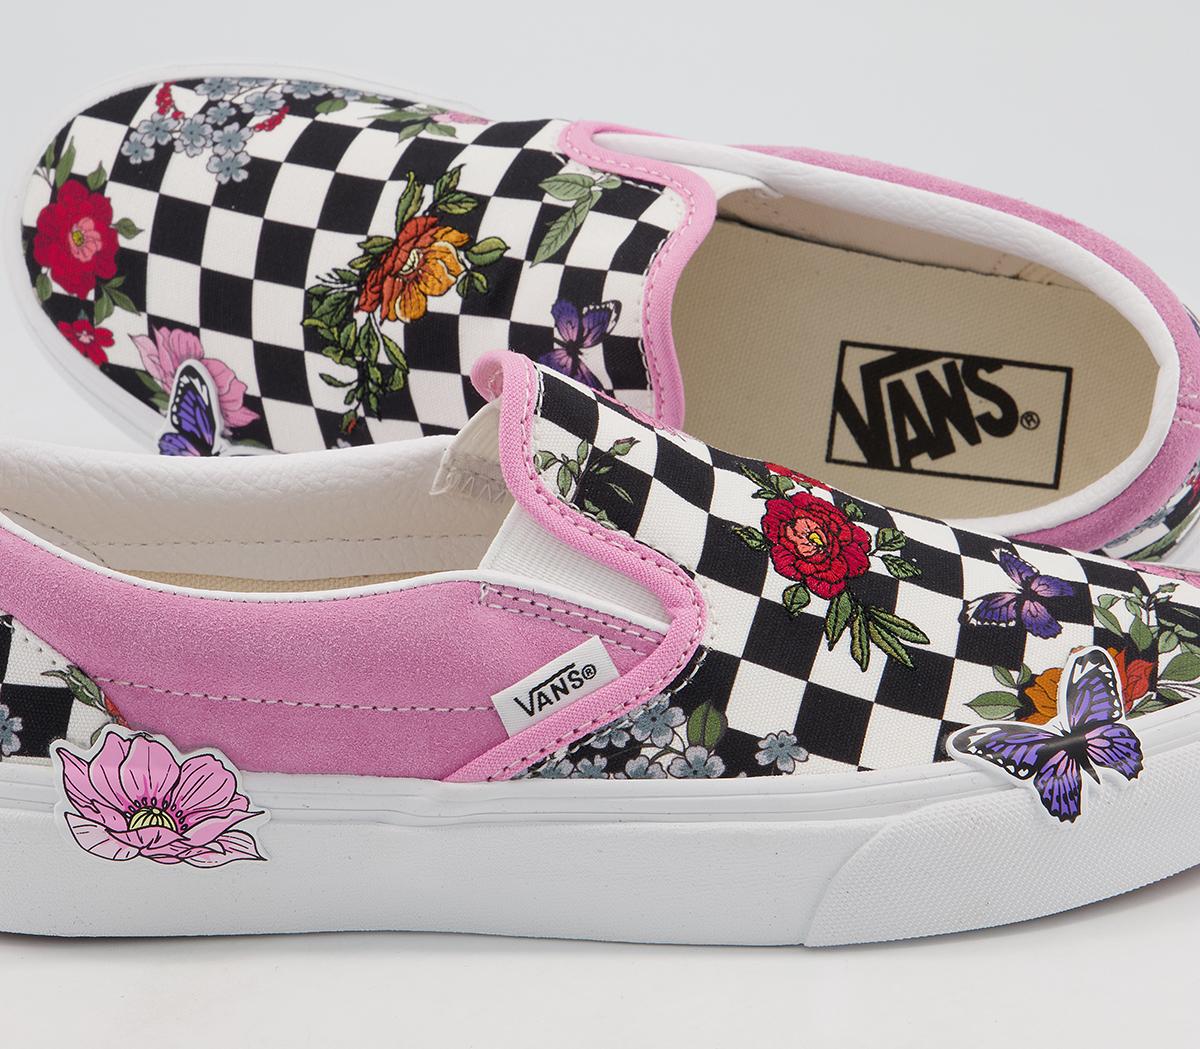 Vans Vans Classic Slip On Trainers Pink Embroidered Floral Checkerboard Exclusive Hers Trainers